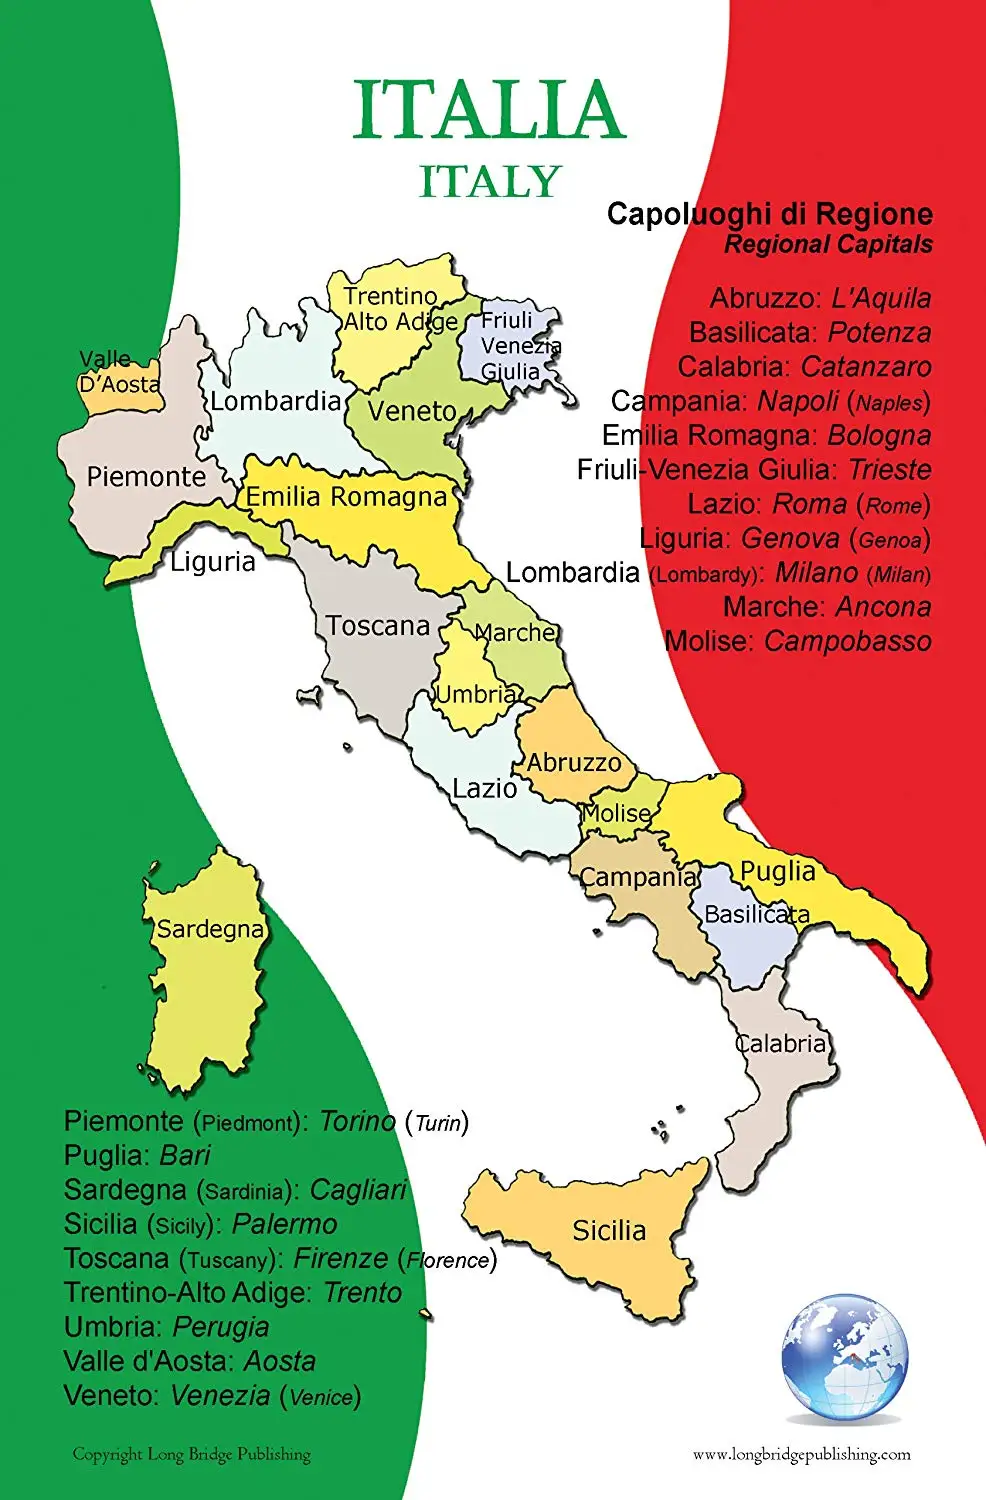 Buy Poster in Italian - Map of Italy and Its Regions, for Classroom